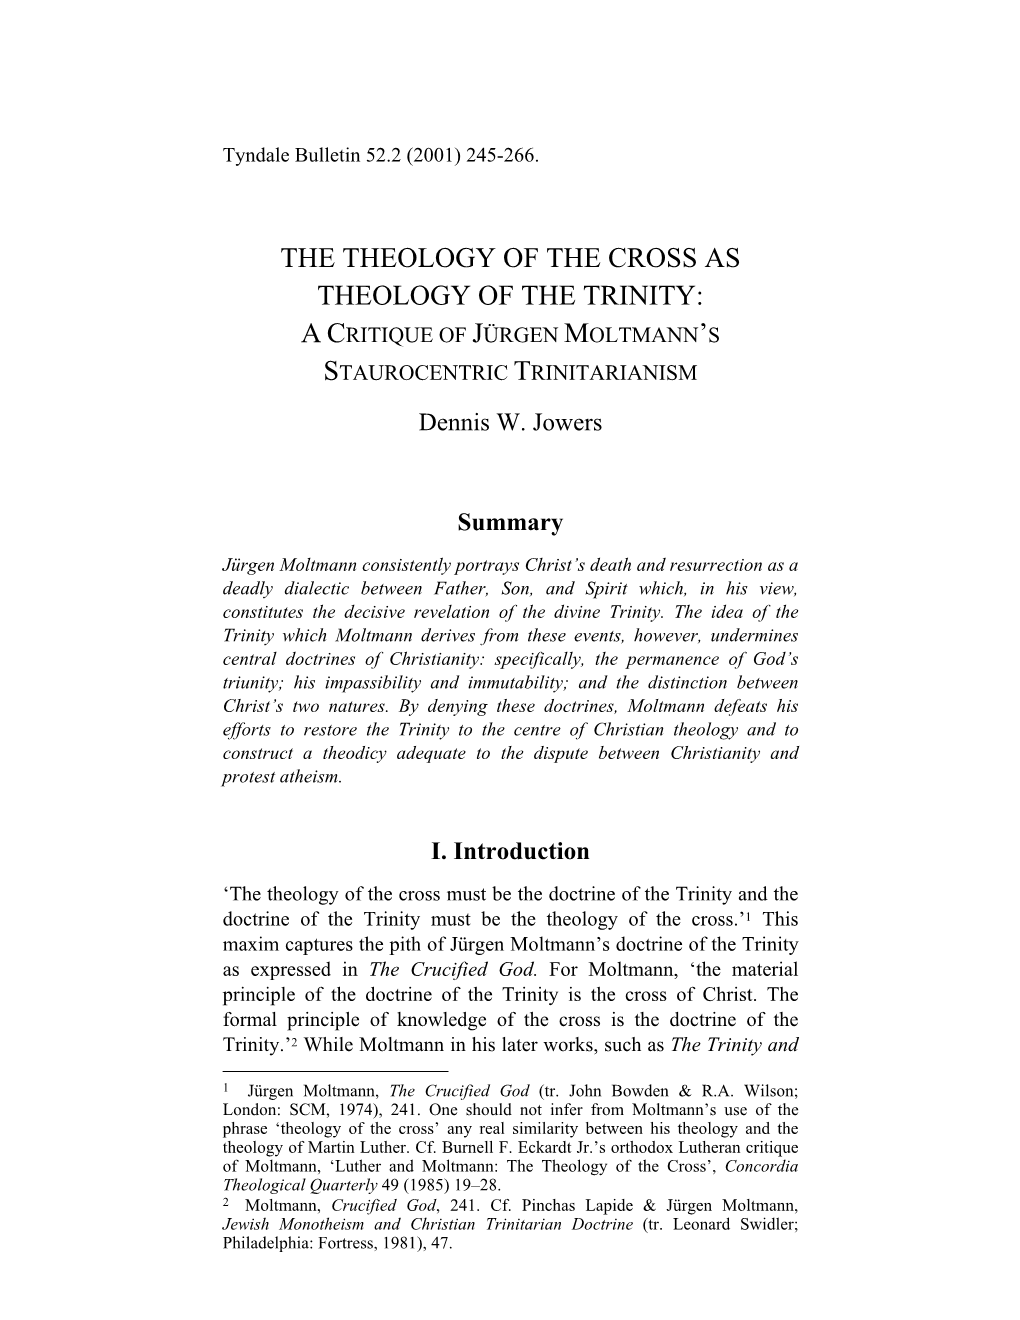 THE THEOLOGY of the CROSS AS THEOLOGY of the TRINITY: a CRITIQUE of JÜRGEN MOLTMANN’S STAUROCENTRIC TRINITARIANISM Dennis W